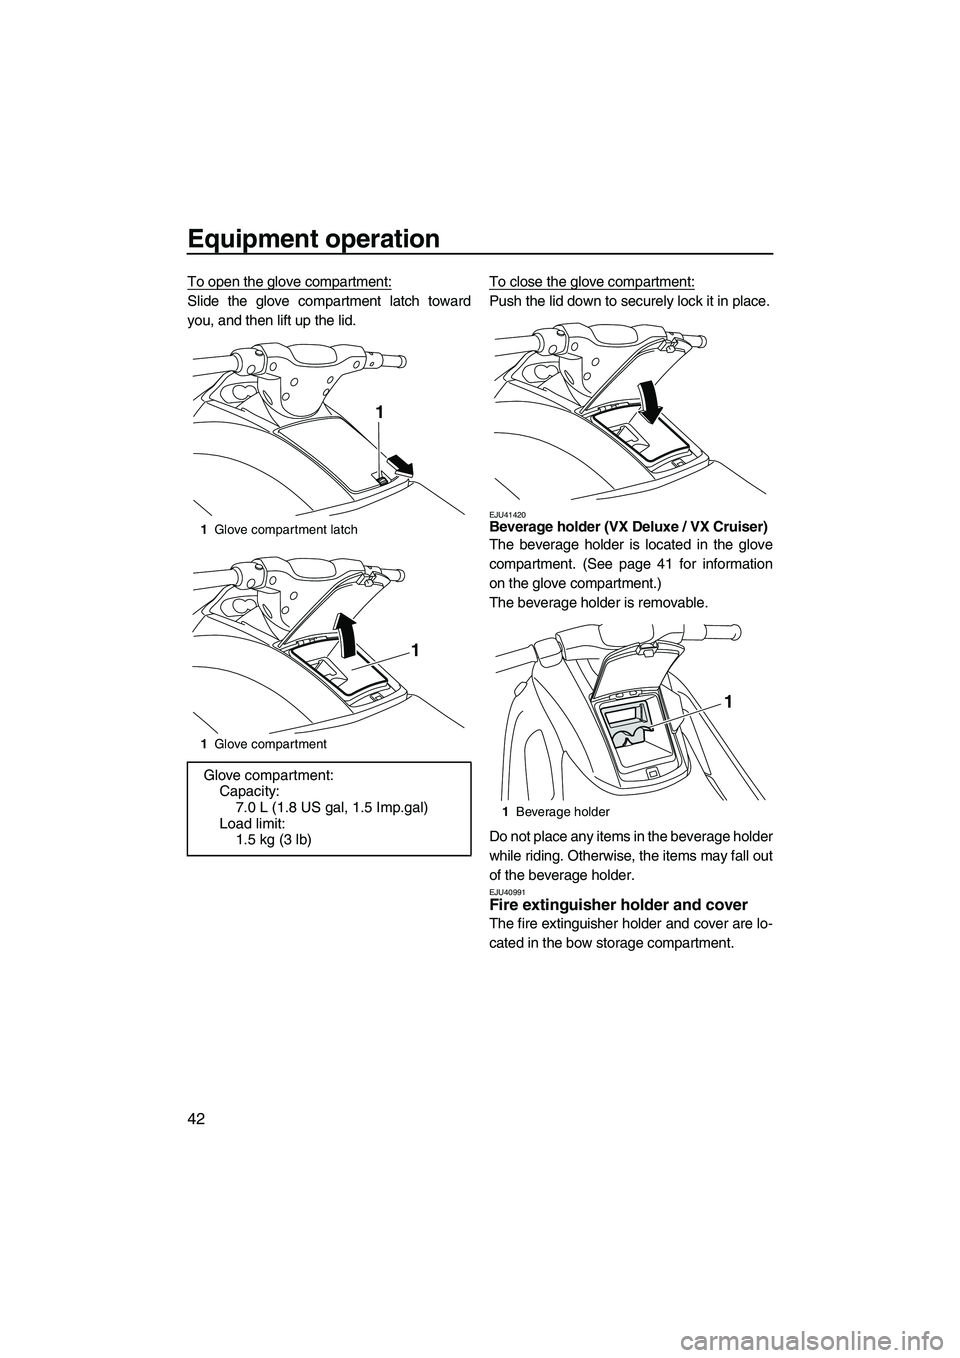 YAMAHA VX SPORT 2013 Service Manual Equipment operation
42
To open the glove compartment:
Slide the glove compartment latch toward
you, and then lift up the lid.To close the glove compartment:Push the lid down to securely lock it in pla